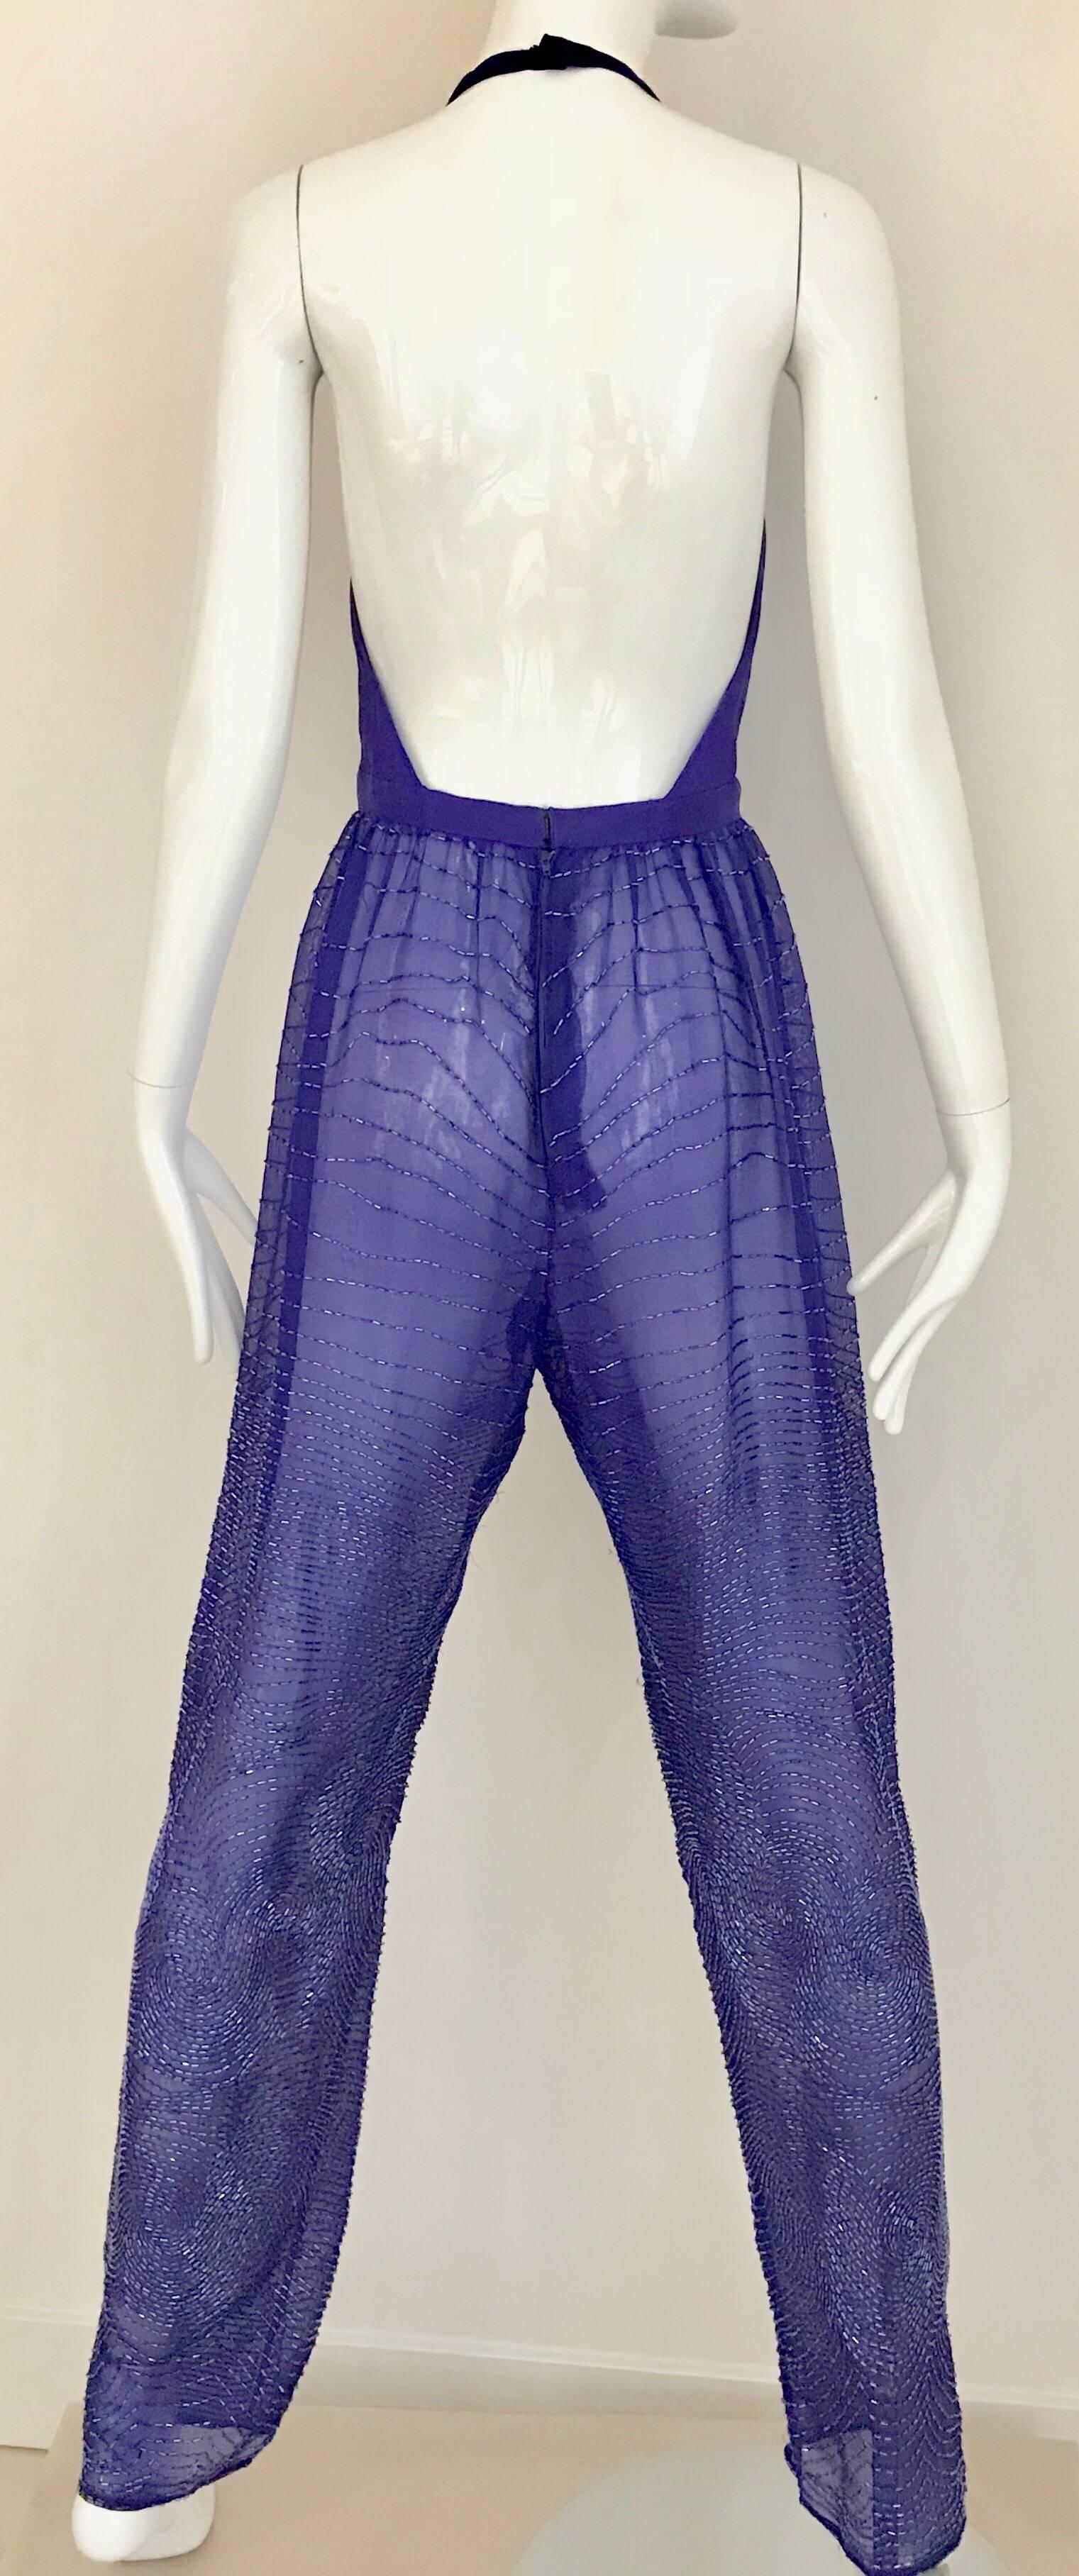 Iconic Studio 54 Sexy Vintage 1970s Purple Violet Halston Silk Jumpsuit with beads with bare back. 
Size 4/. 
Waist: 26 inches/ Bust: 36”/ Hip: 36”

**small tiny holes see pictures attached